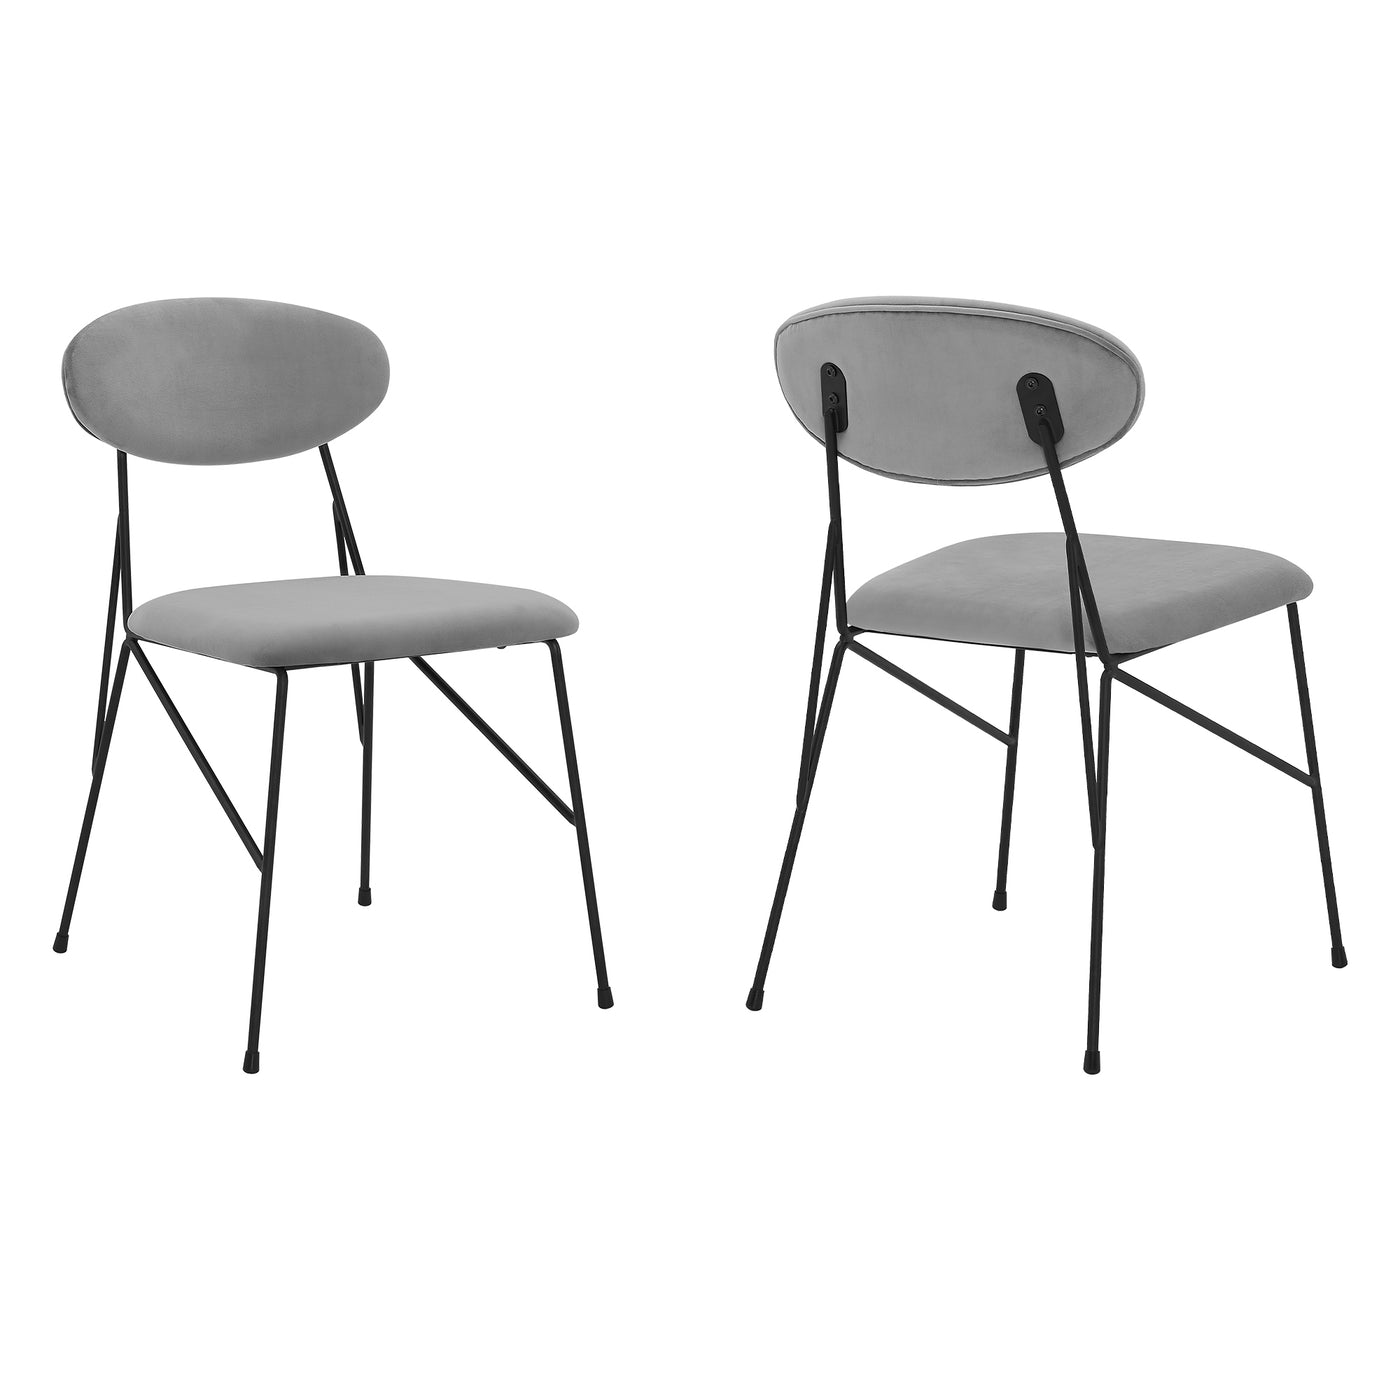 Alice Dining Chair Set of 2